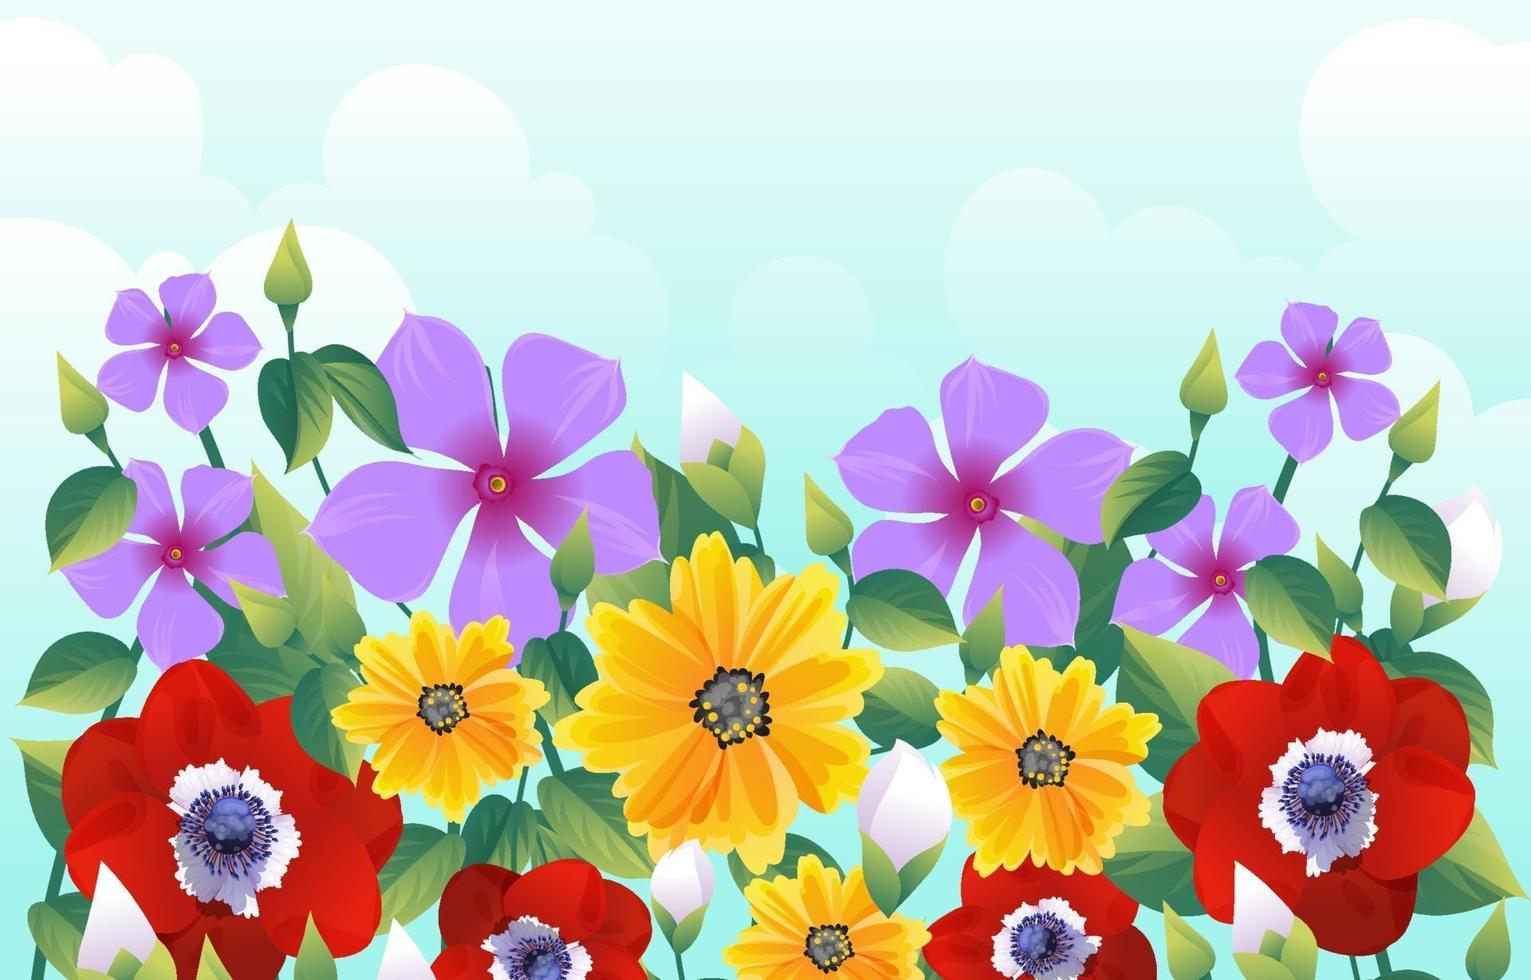 Colorful Flowers with Sky Background vector